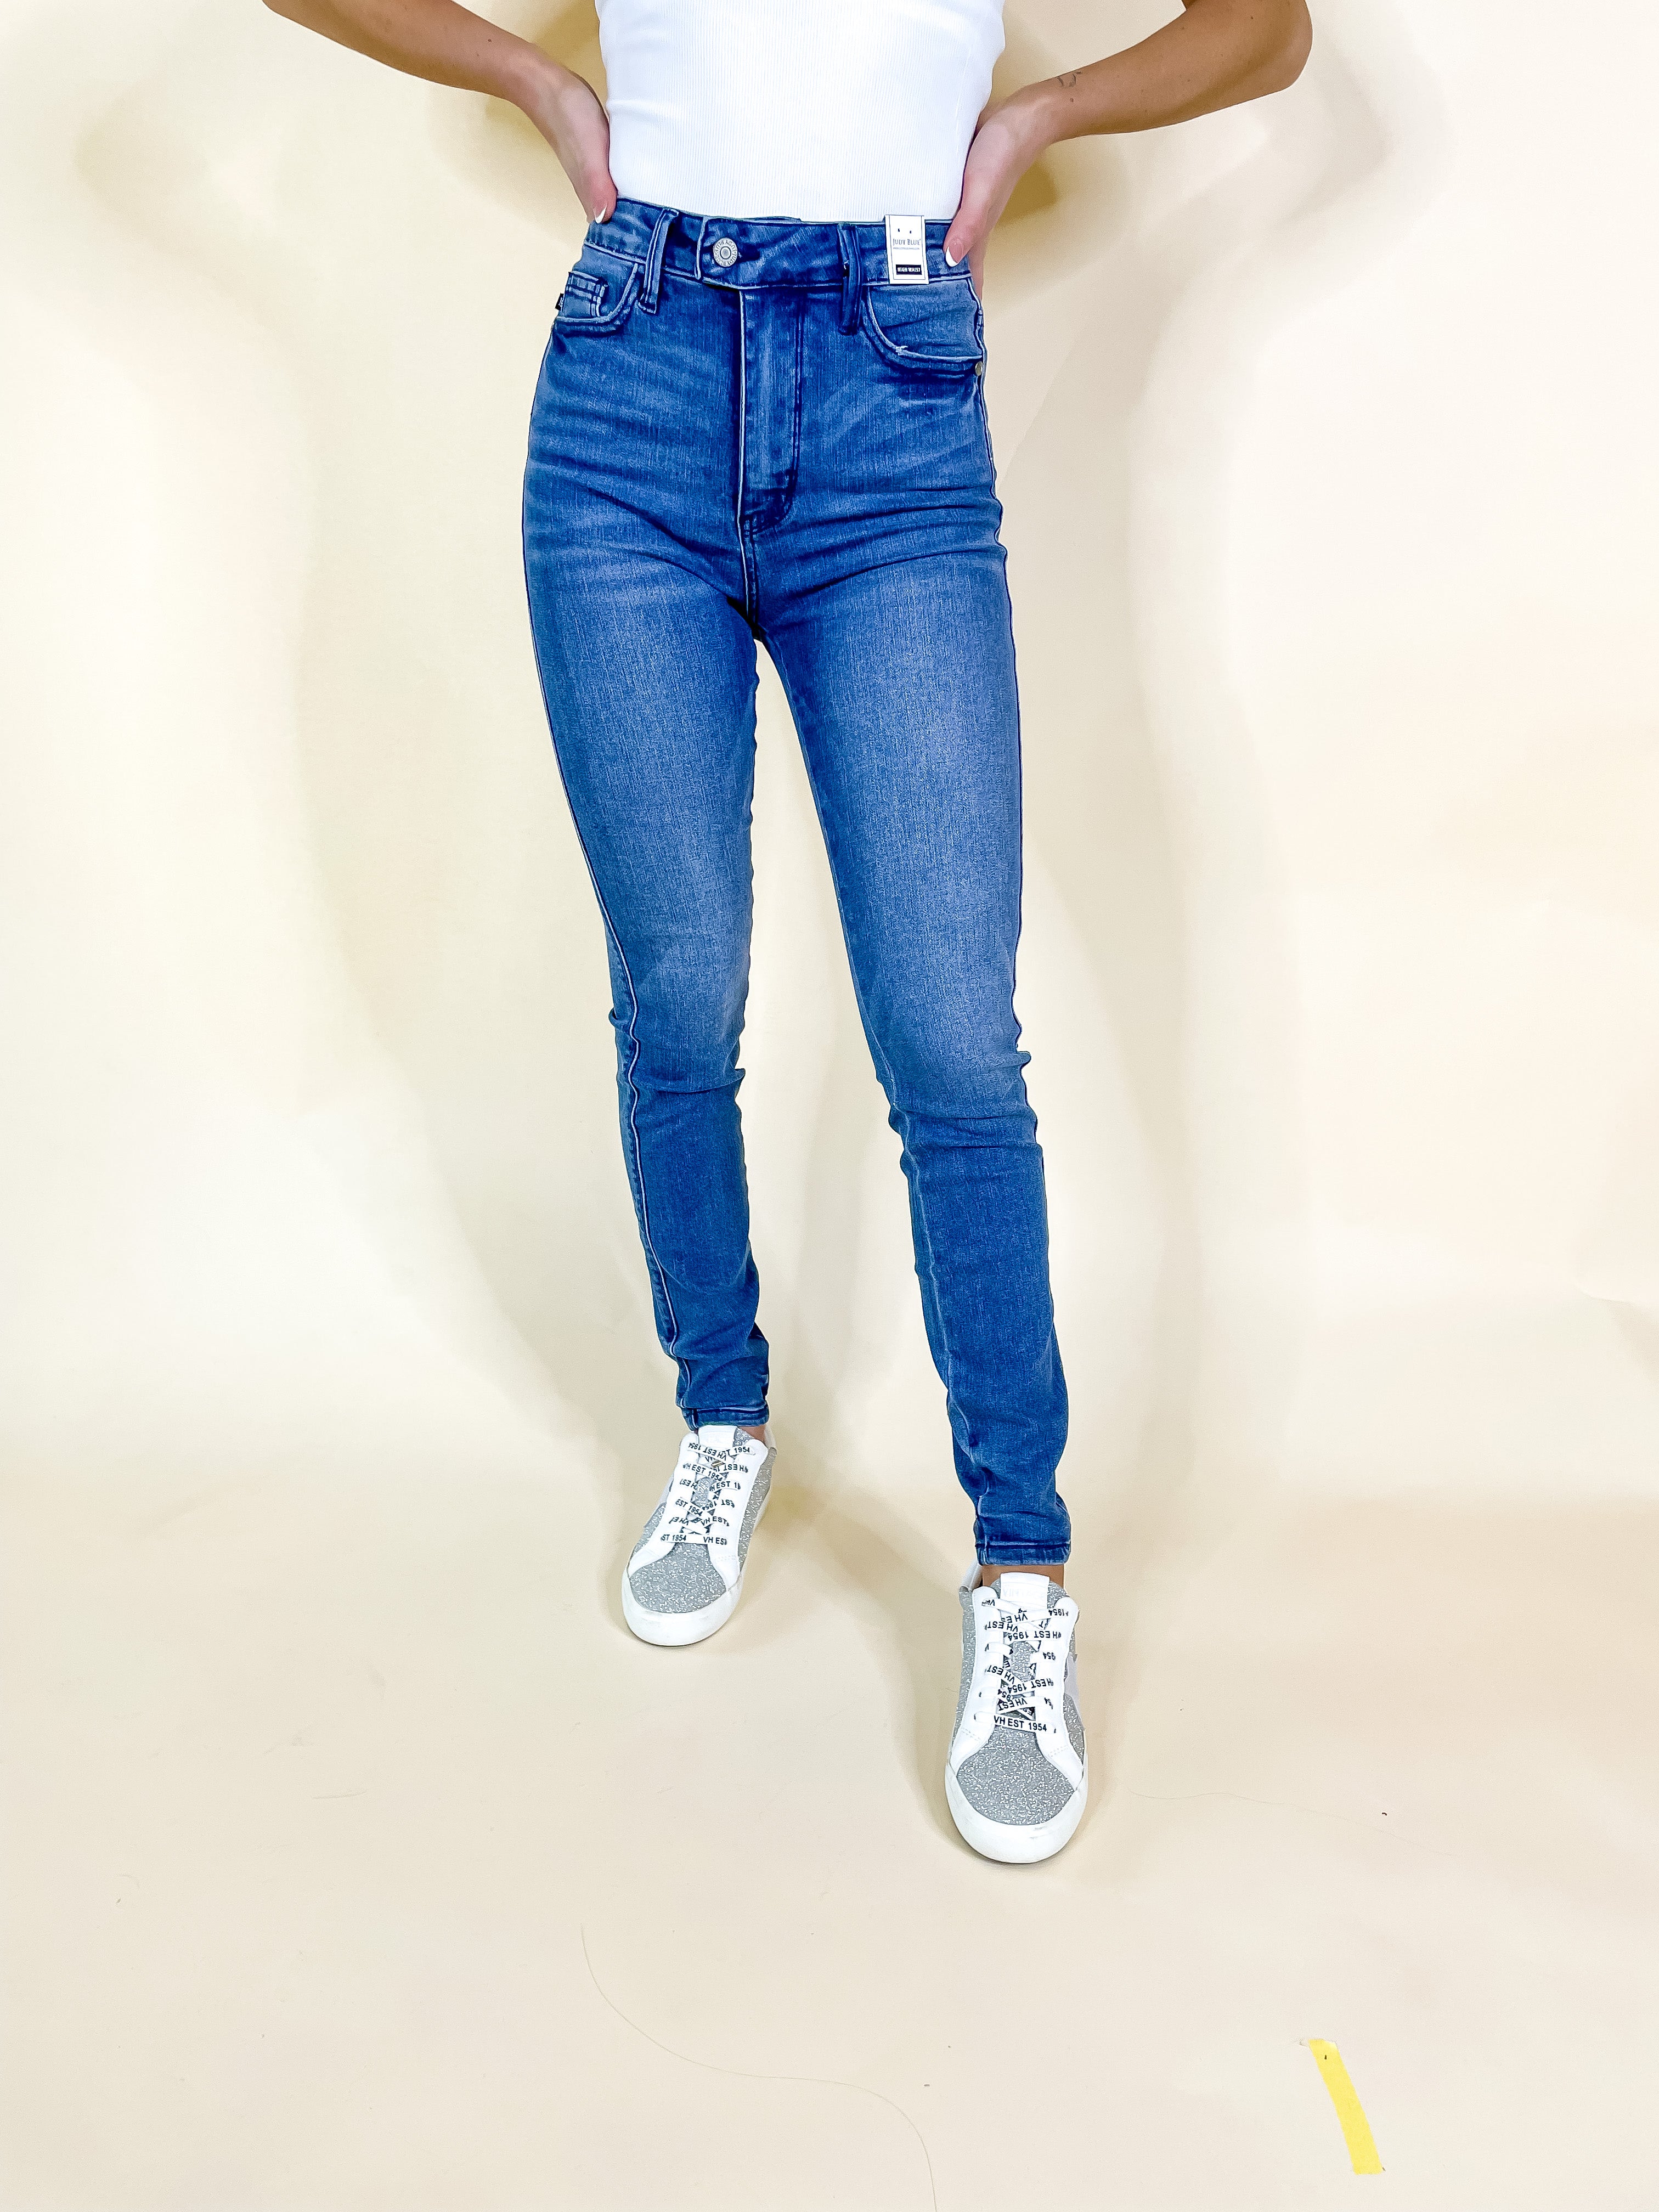 Judy Blue | Faithful Friend Control Top Skinny Jeans in Cool Medium Wash - Giddy Up Glamour Boutique